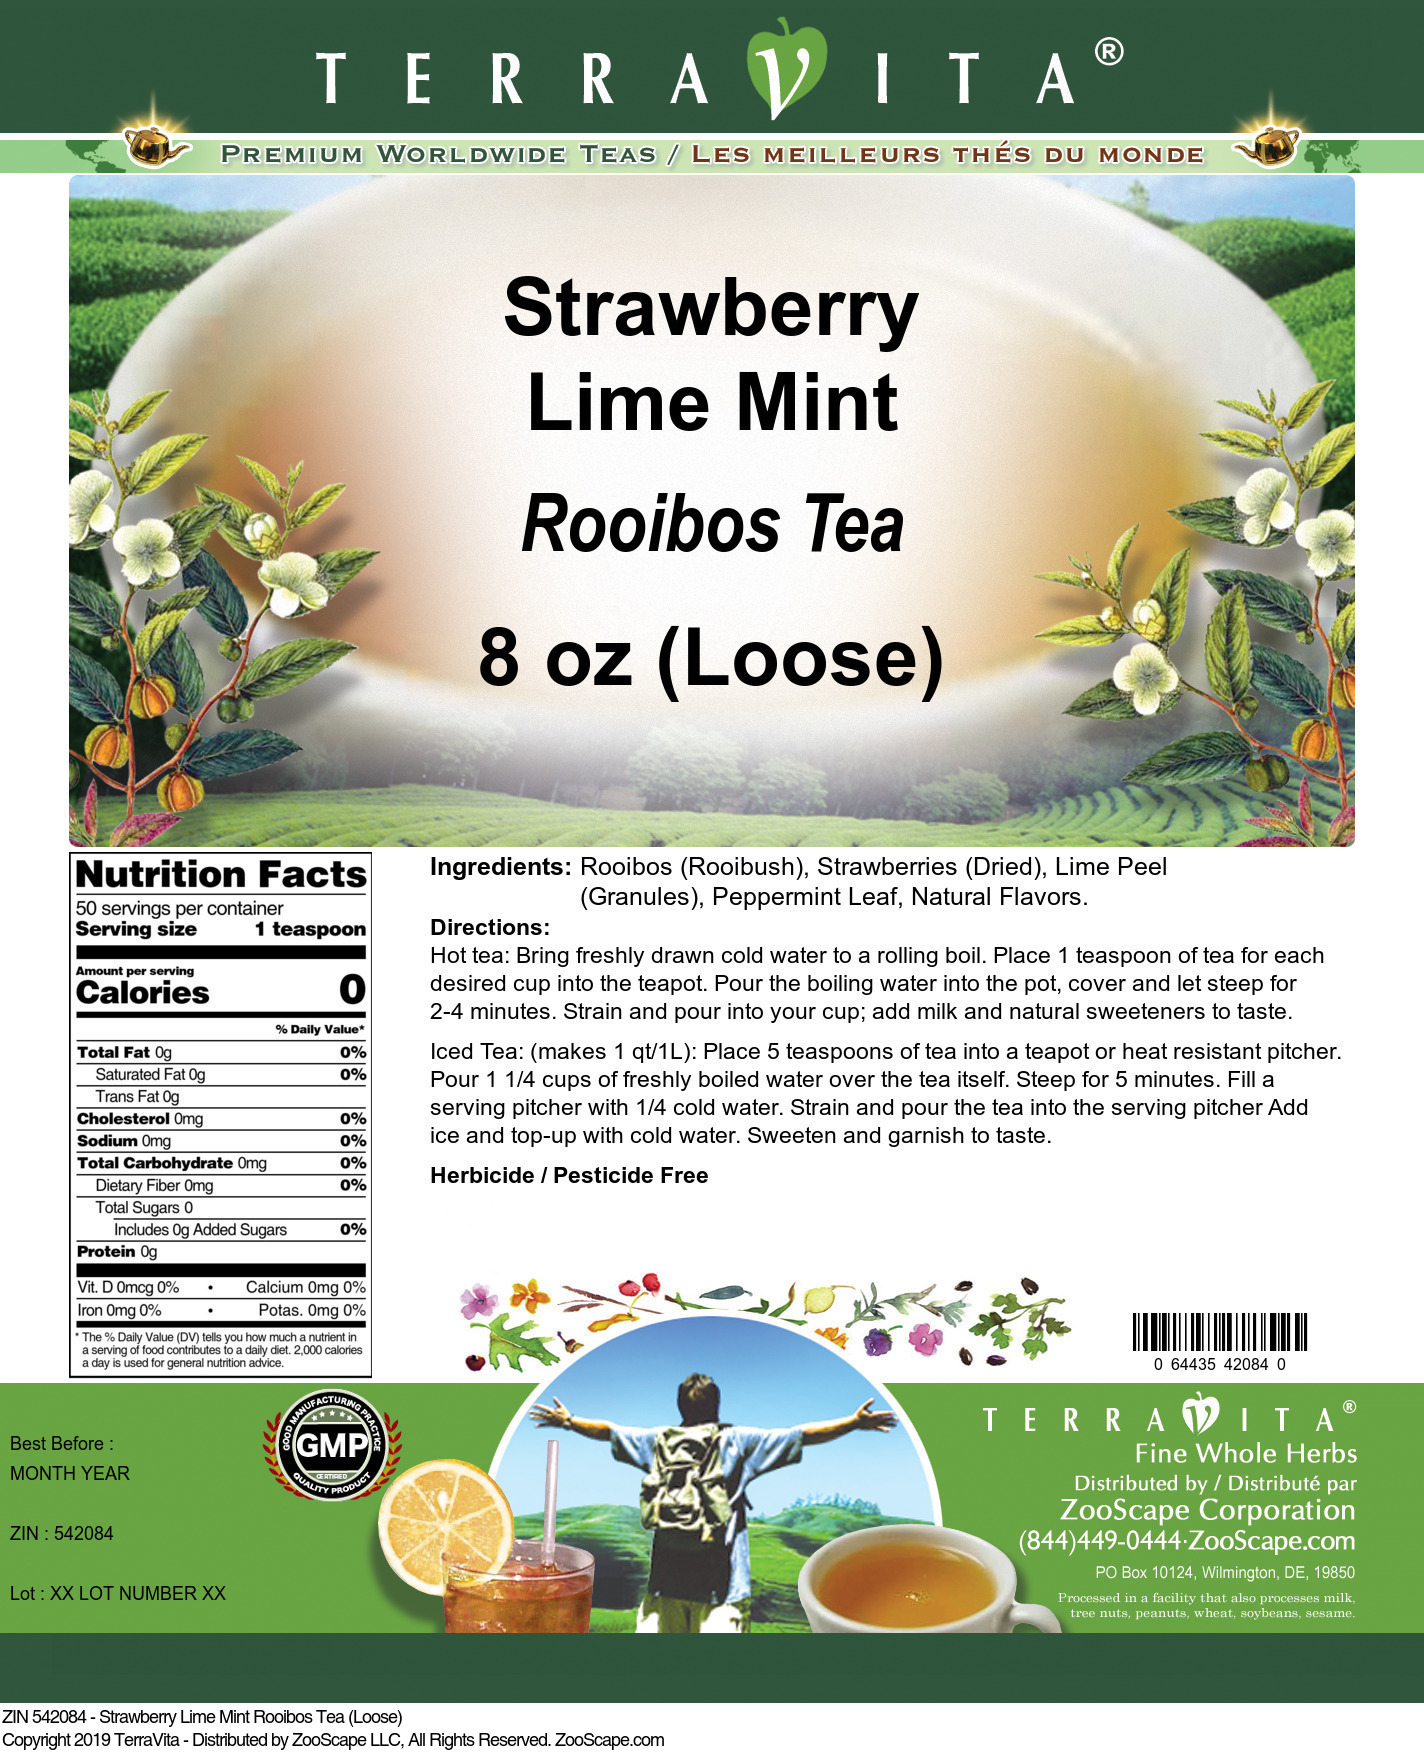 Strawberry Lime Mint Rooibos Tea (Loose) - Label